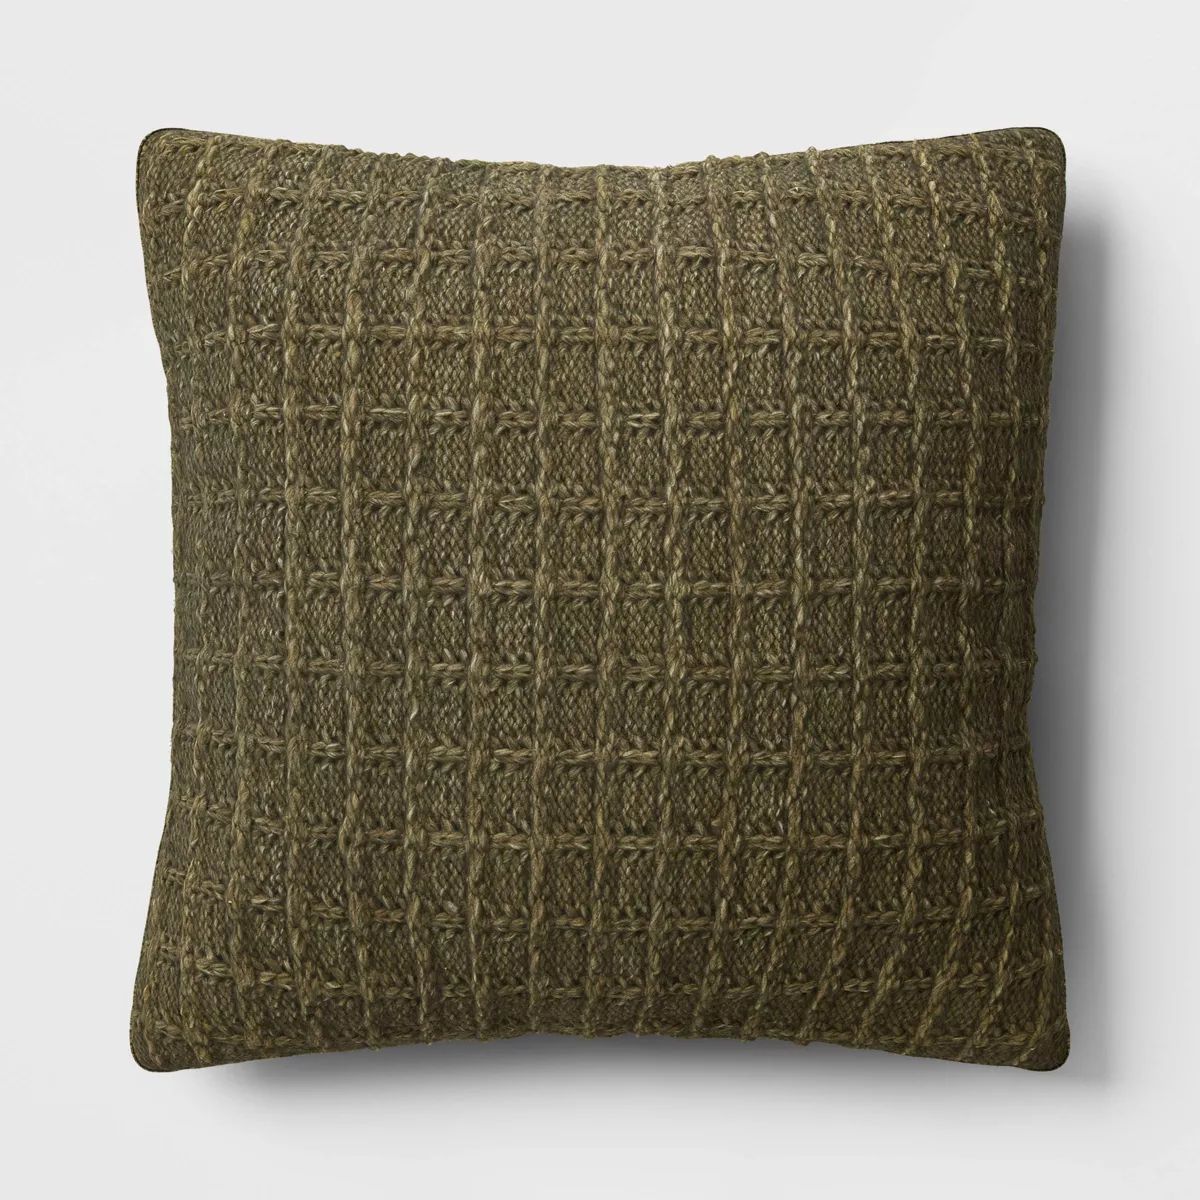 Oversized Marled Knit Square Throw Pillow - Threshold™ | Target